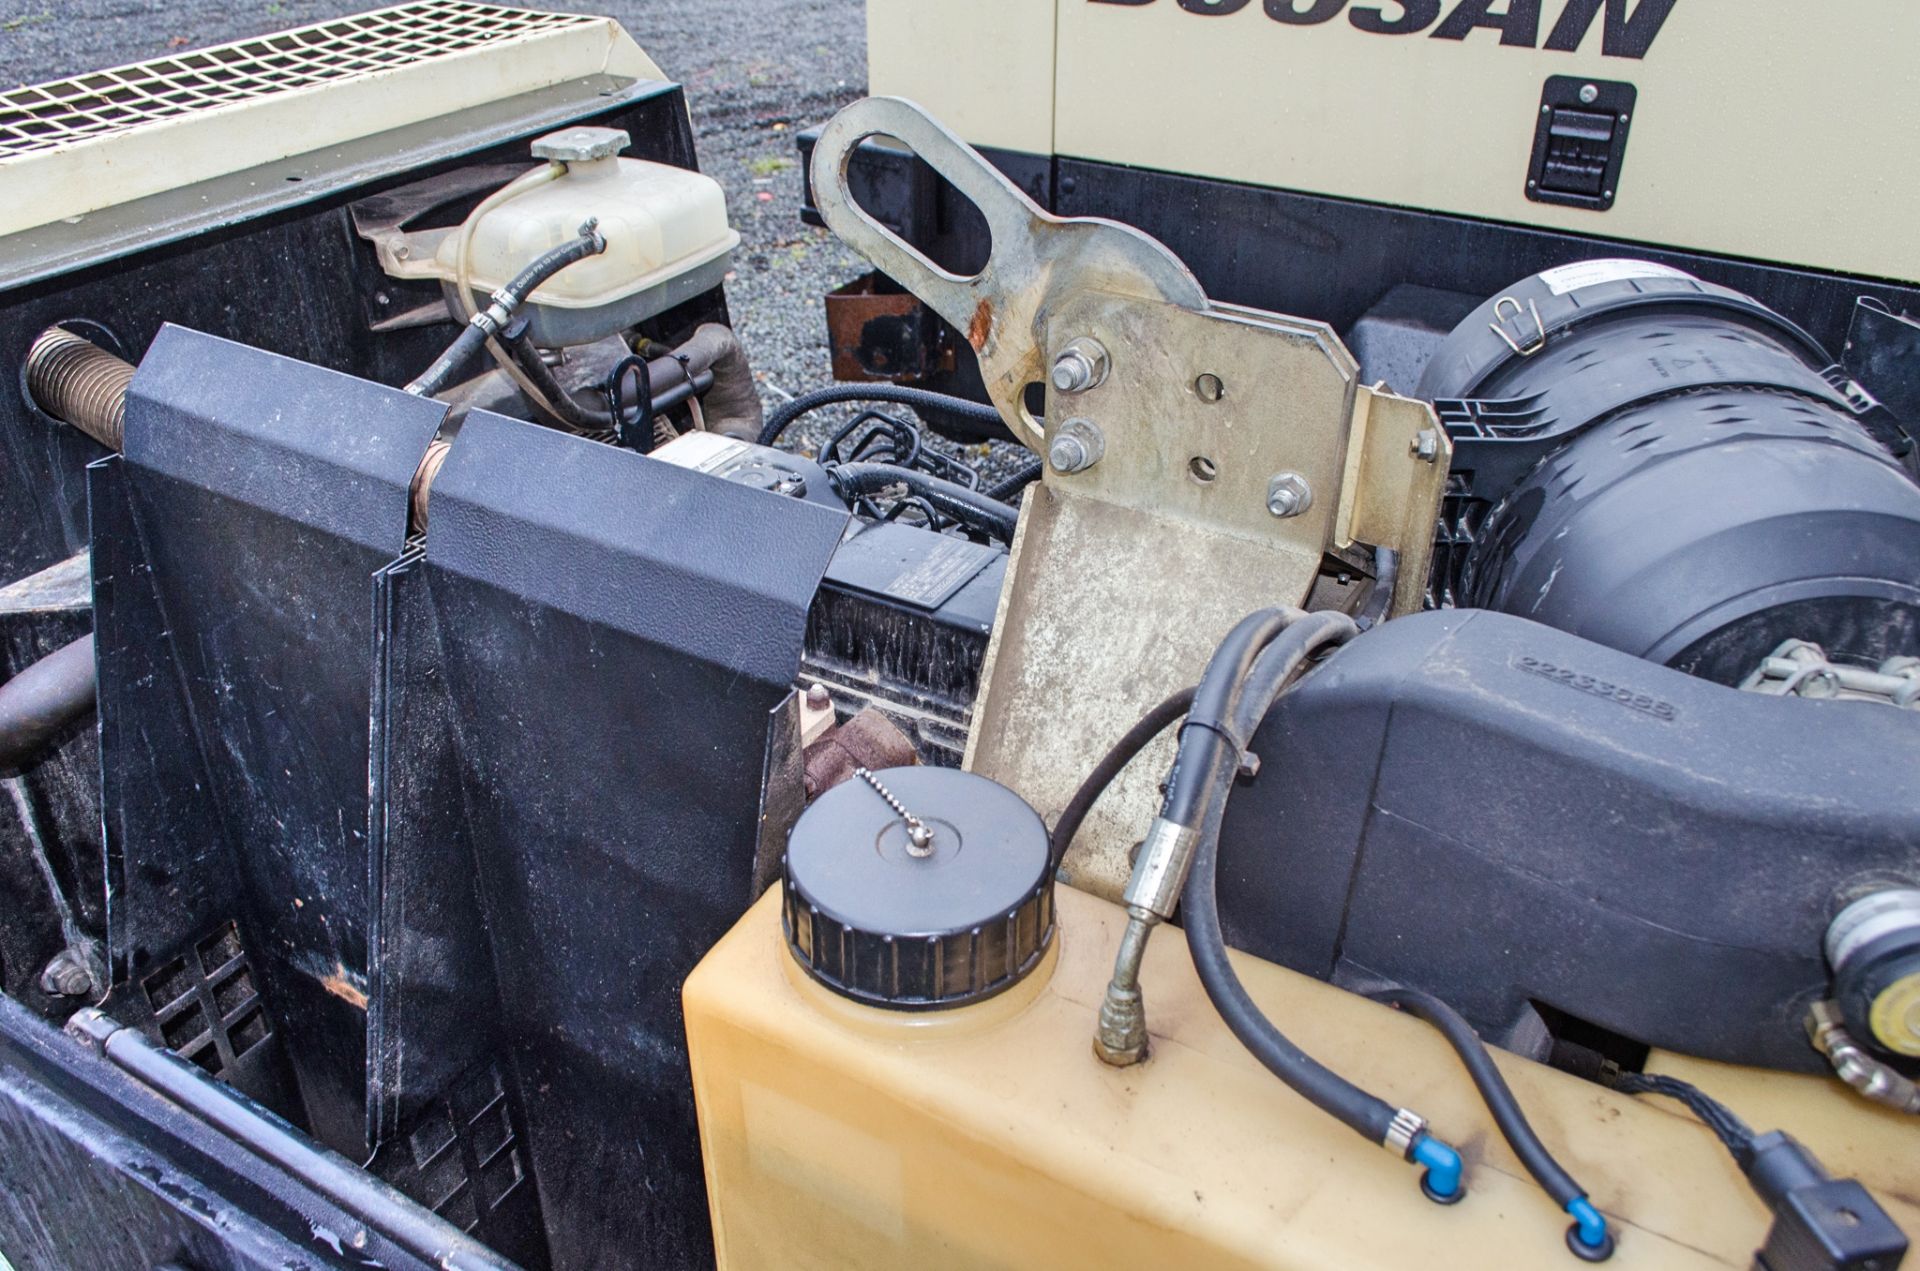 Doosan 7/41 diesel driven fast tow mobile air compressor Year: 2013 S/N: 431992 Recorded hours: 1374 - Image 6 of 7